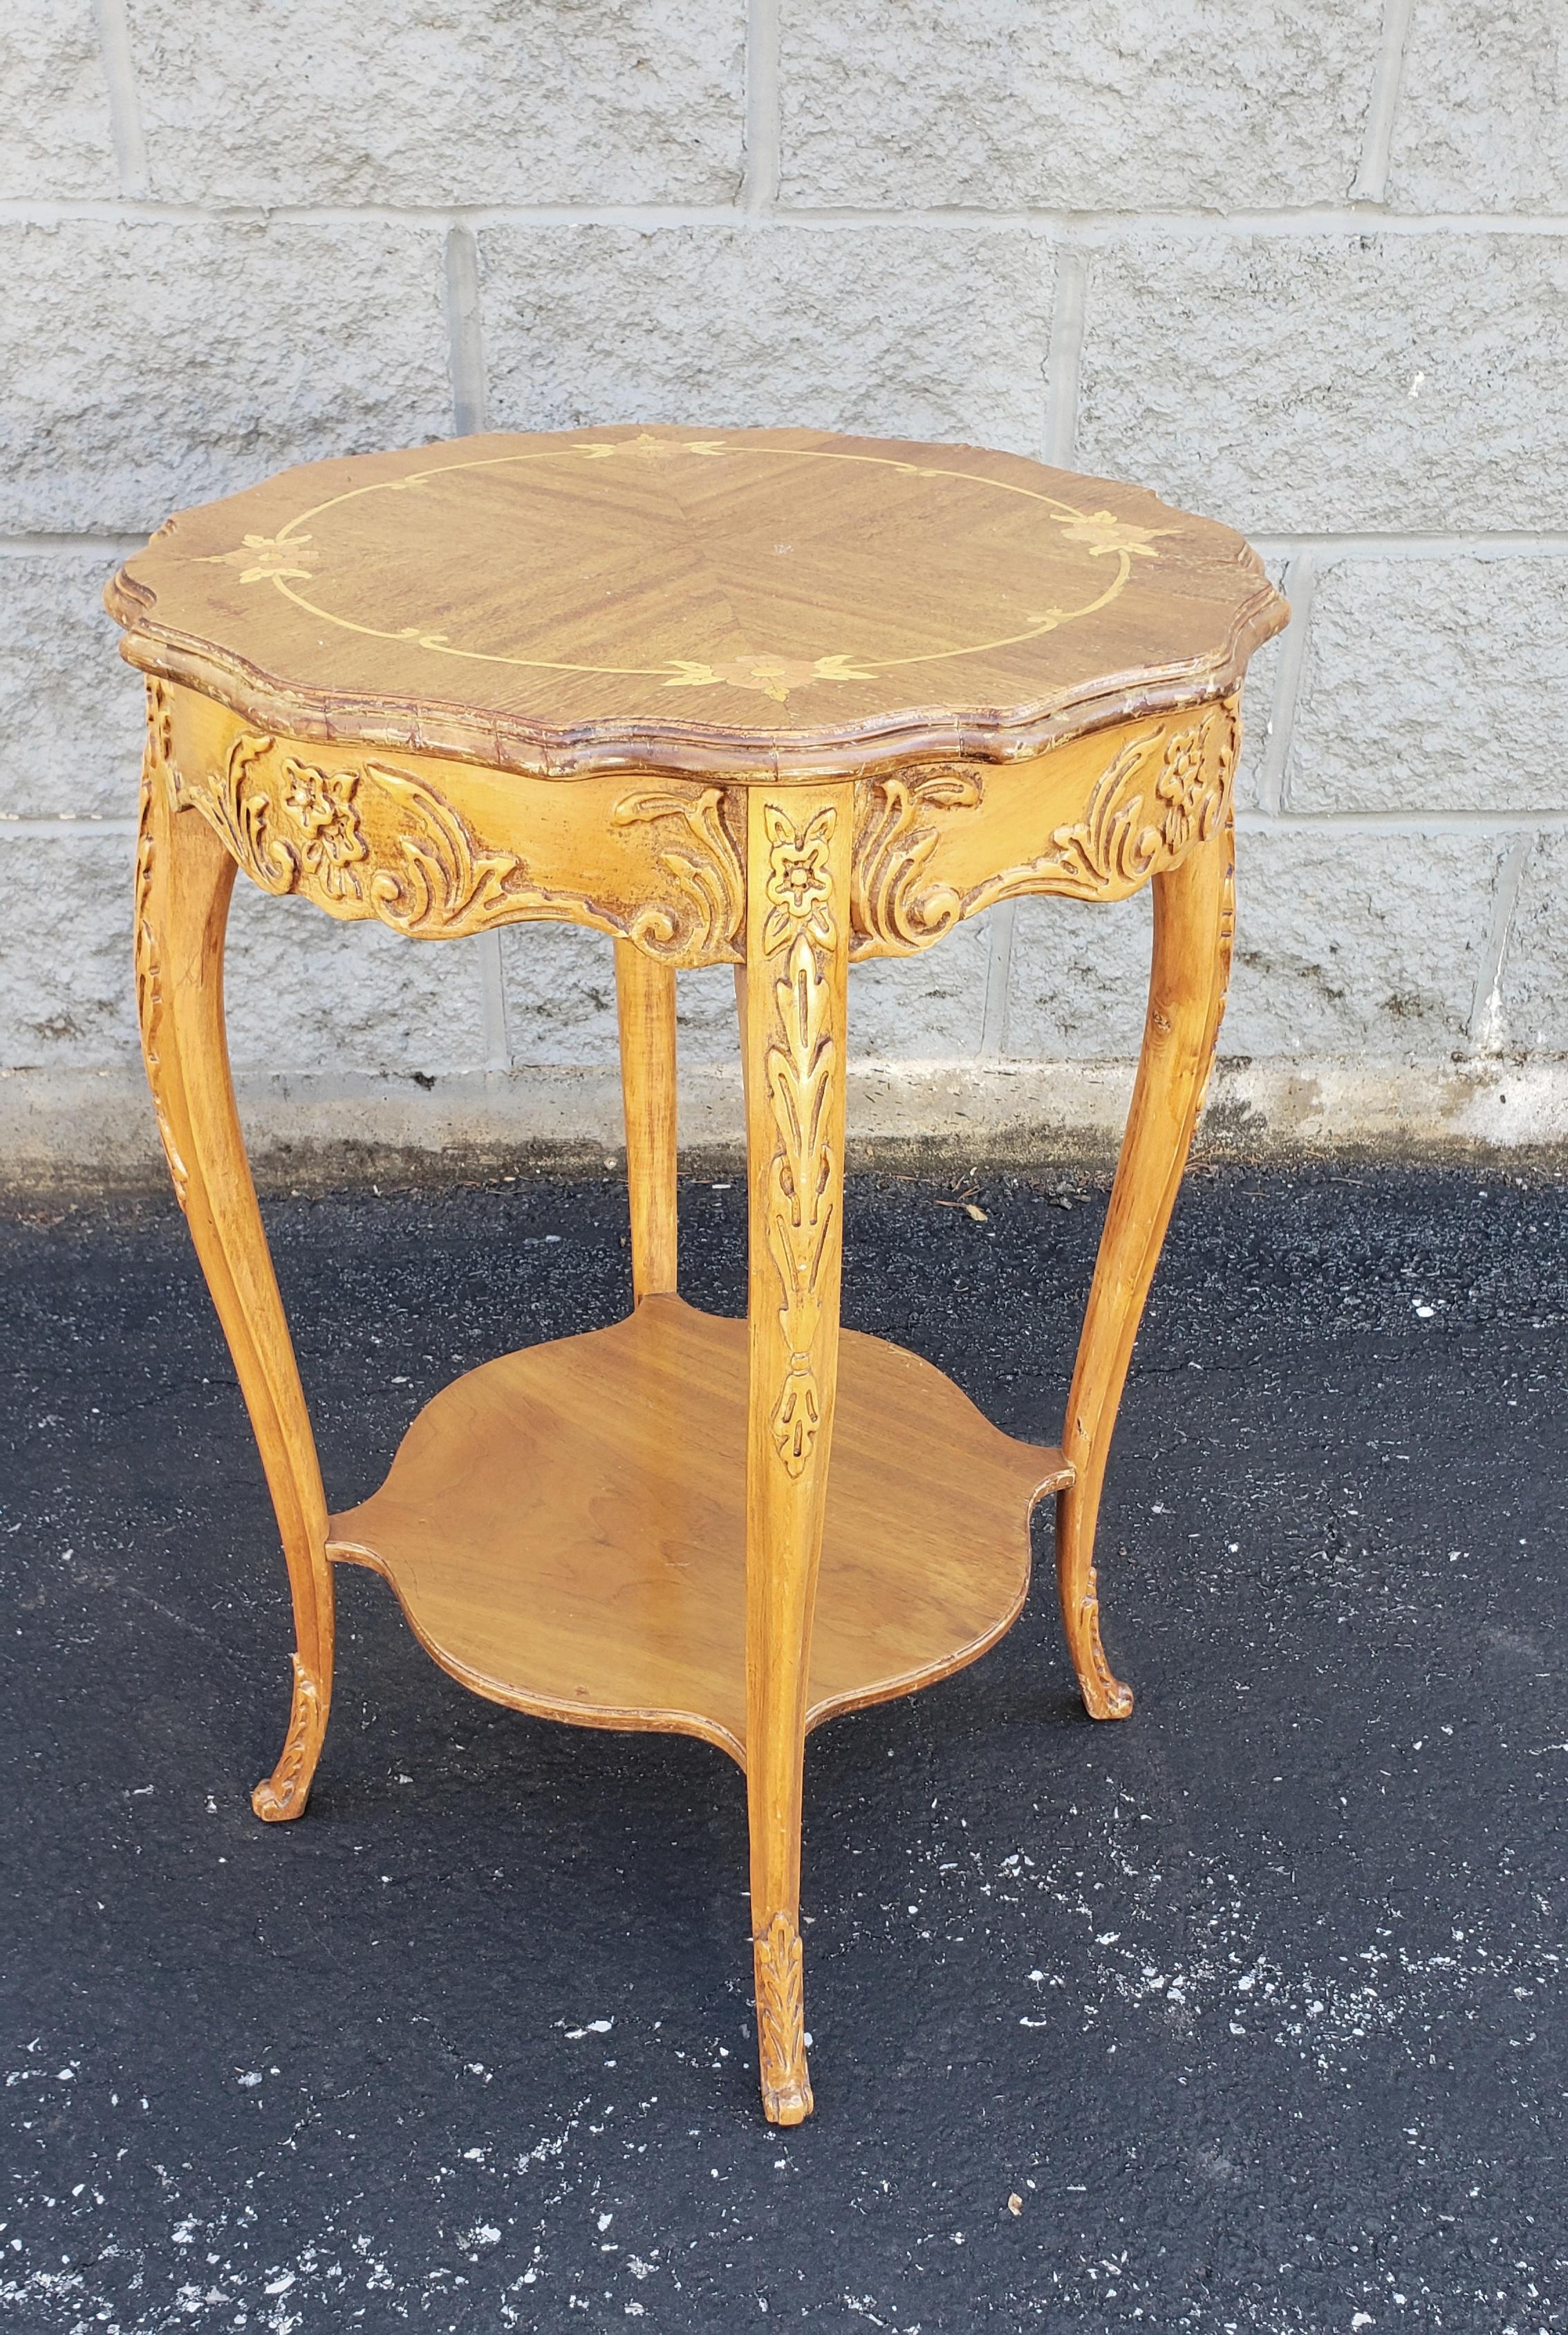 20th Century Italian Rococo Revival Marquetry Fruitwood Side Table For Sale